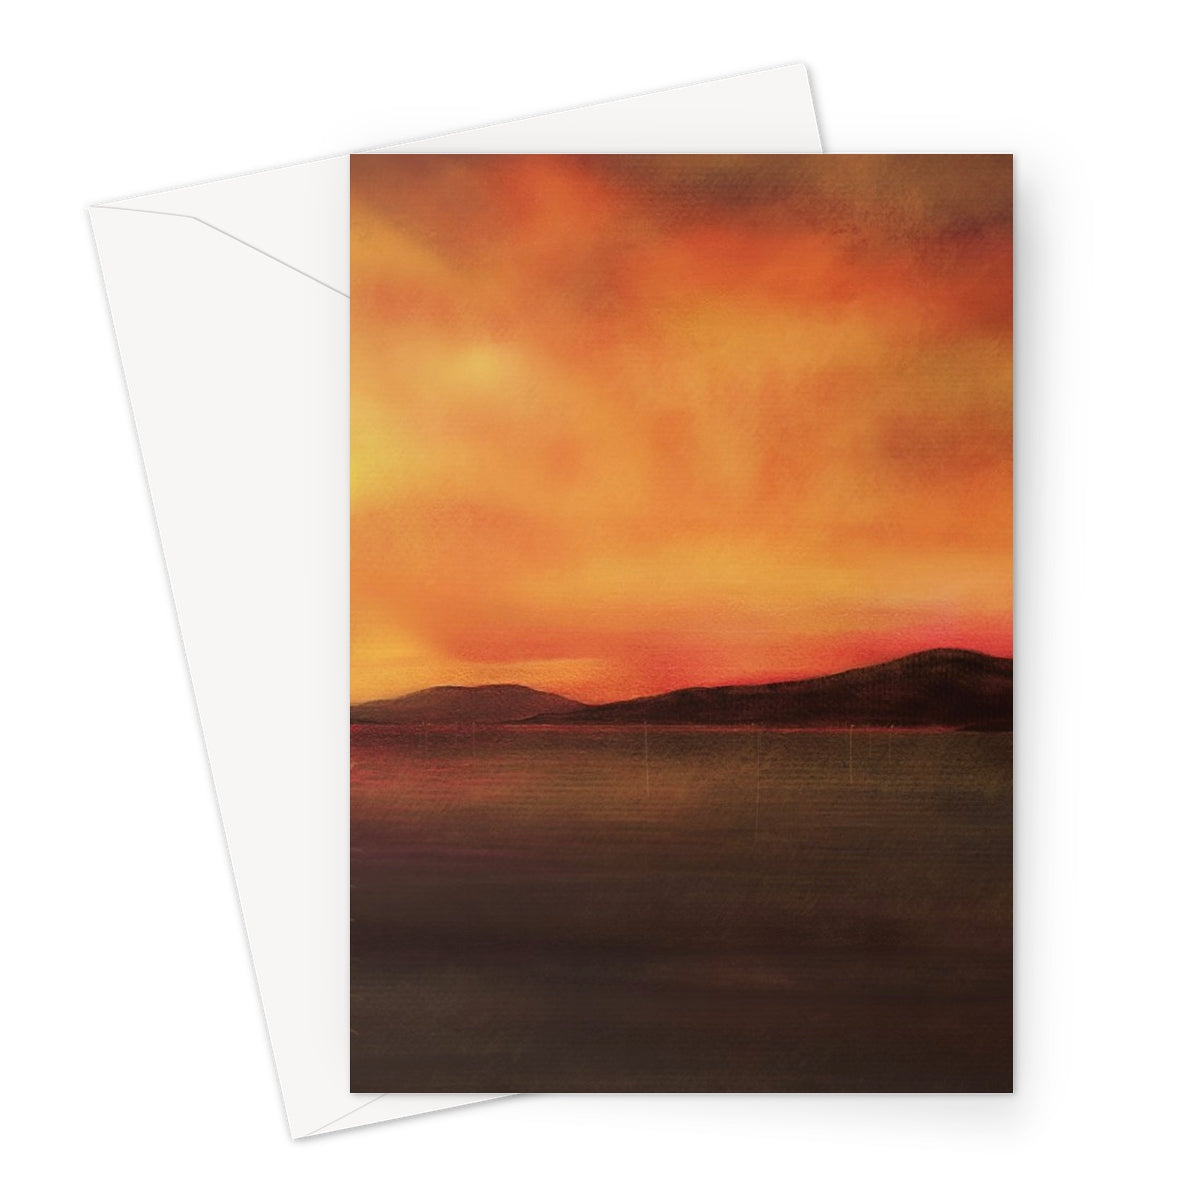 Harris Sunset Art Gifts Greeting Card-Greetings Cards-Hebridean Islands Art Gallery-A5 Portrait-10 Cards-Paintings, Prints, Homeware, Art Gifts From Scotland By Scottish Artist Kevin Hunter